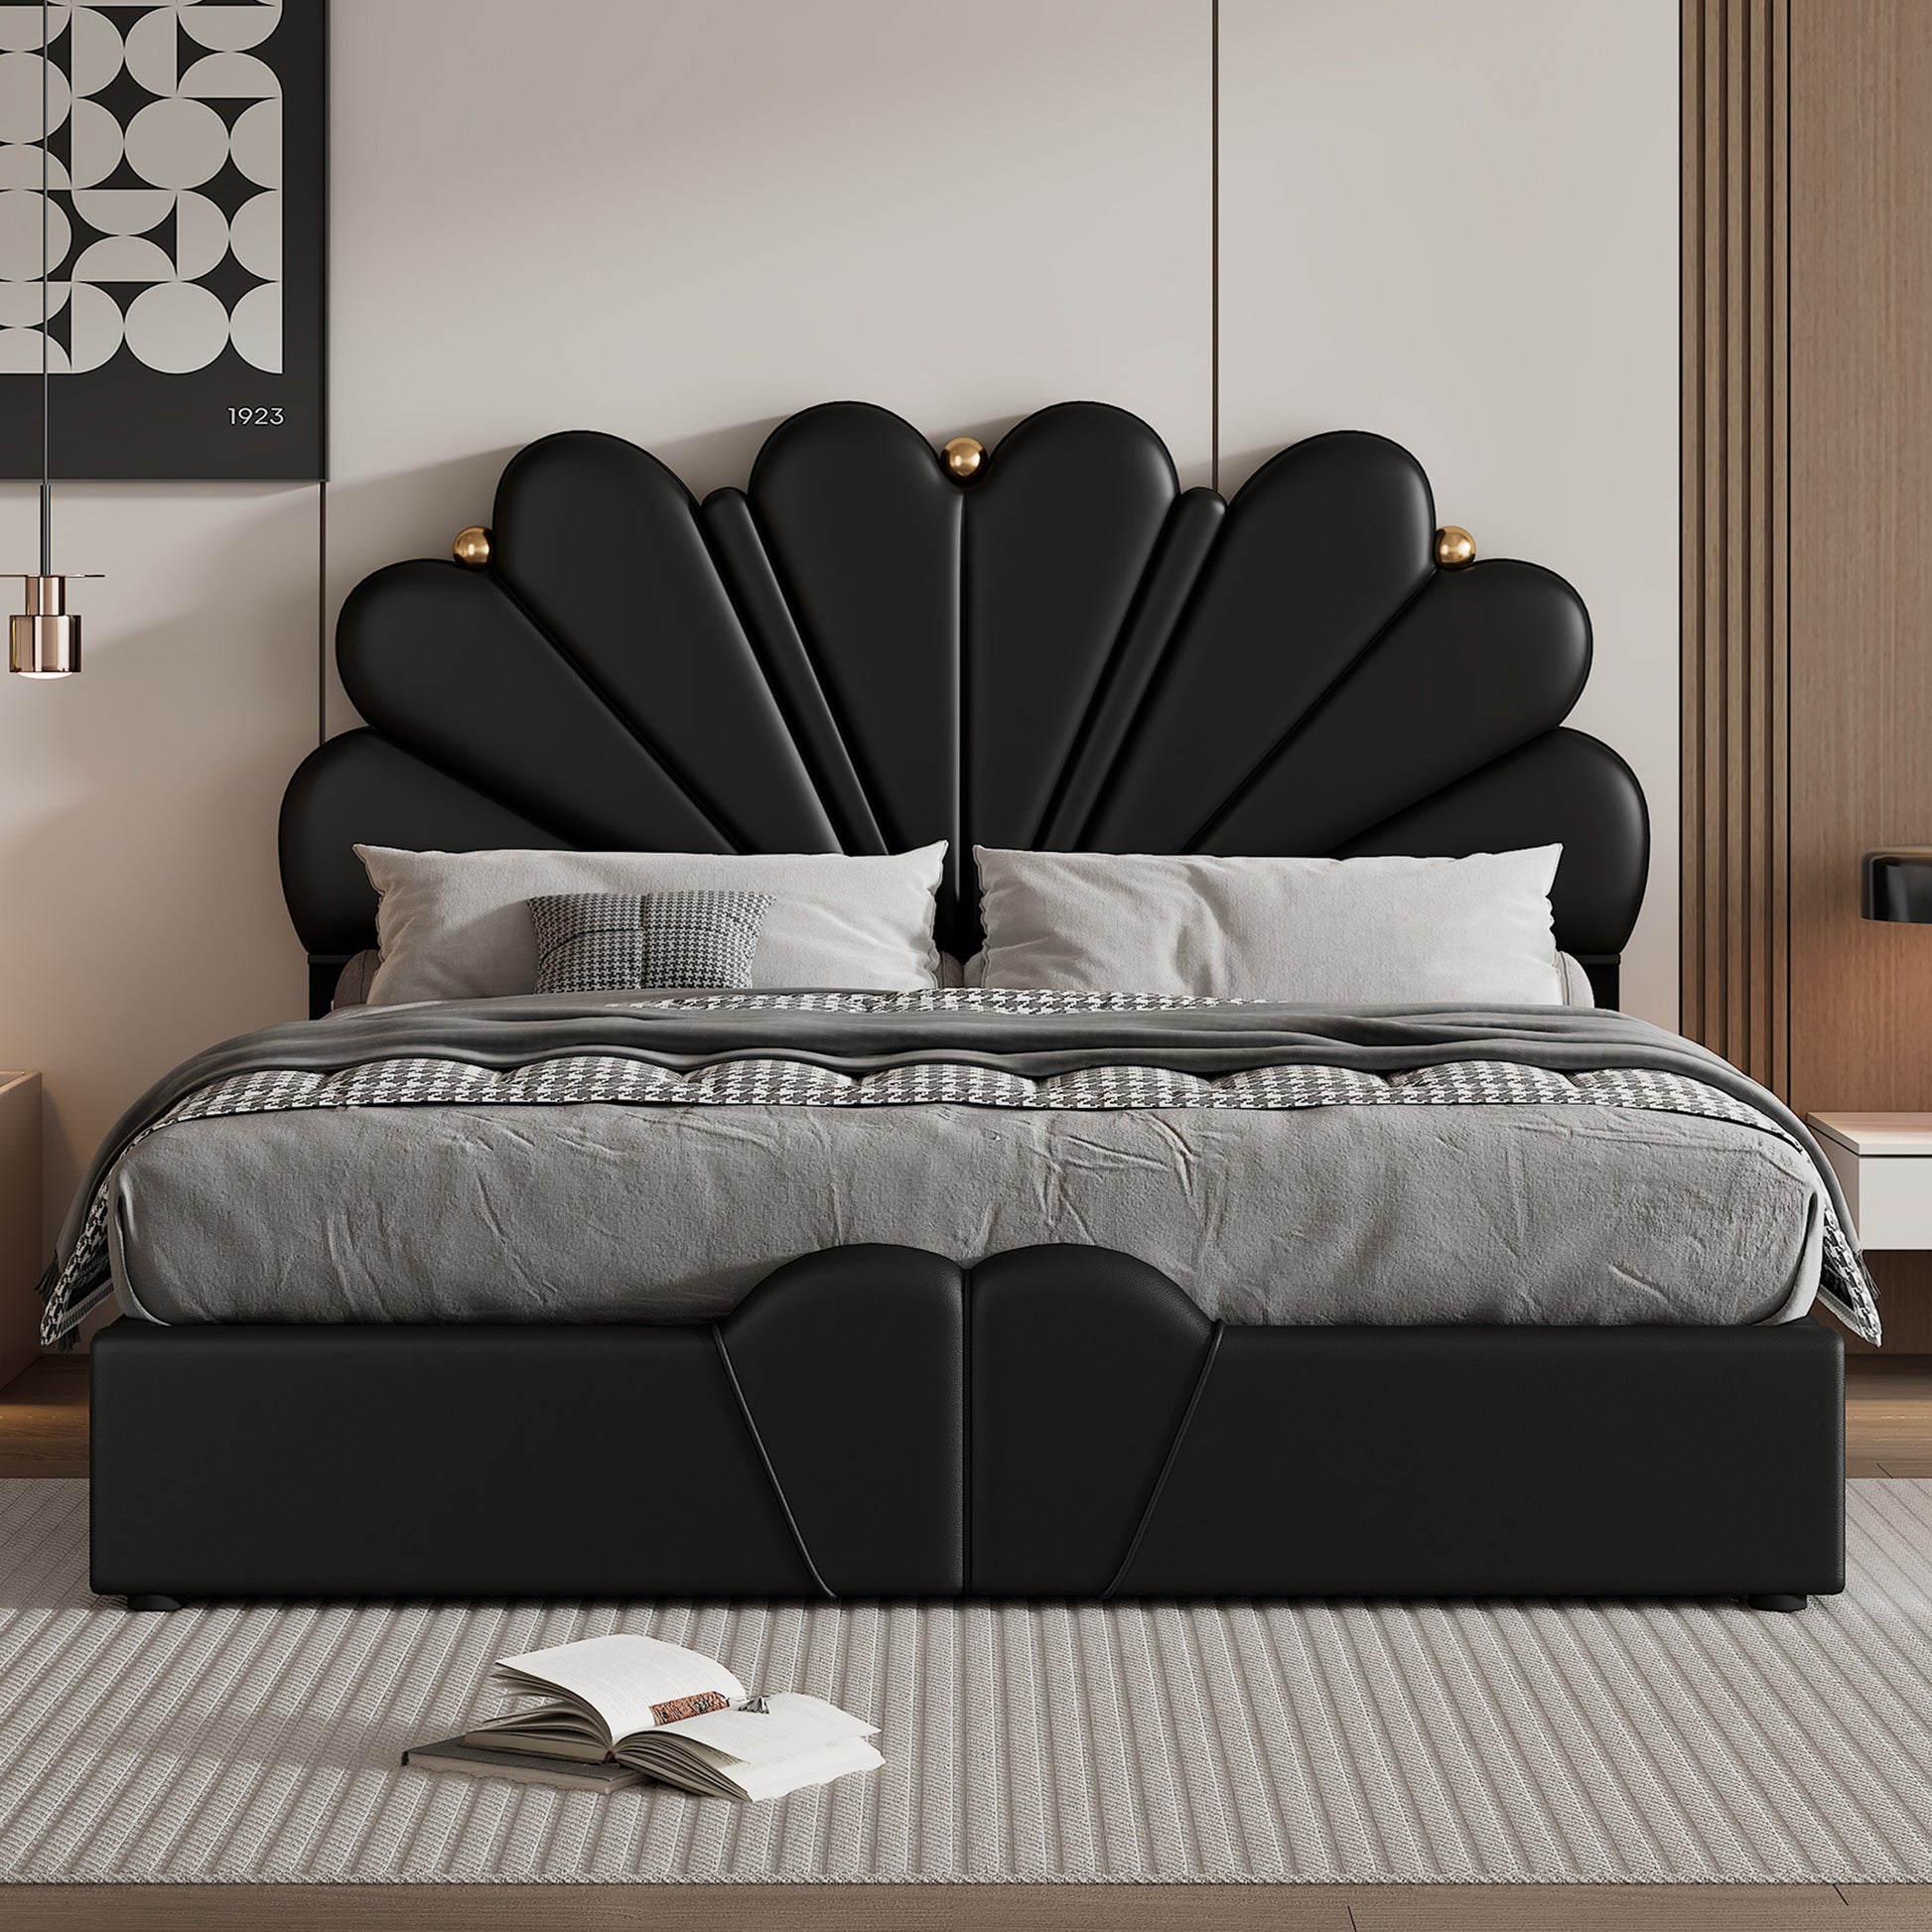 Queen Size Upholstered  Petal Shaped Platform Bed  with Hydraulic Storage System, PU Storage Bed, Decorated with metal balls, Black - Enova Luxe Home Store